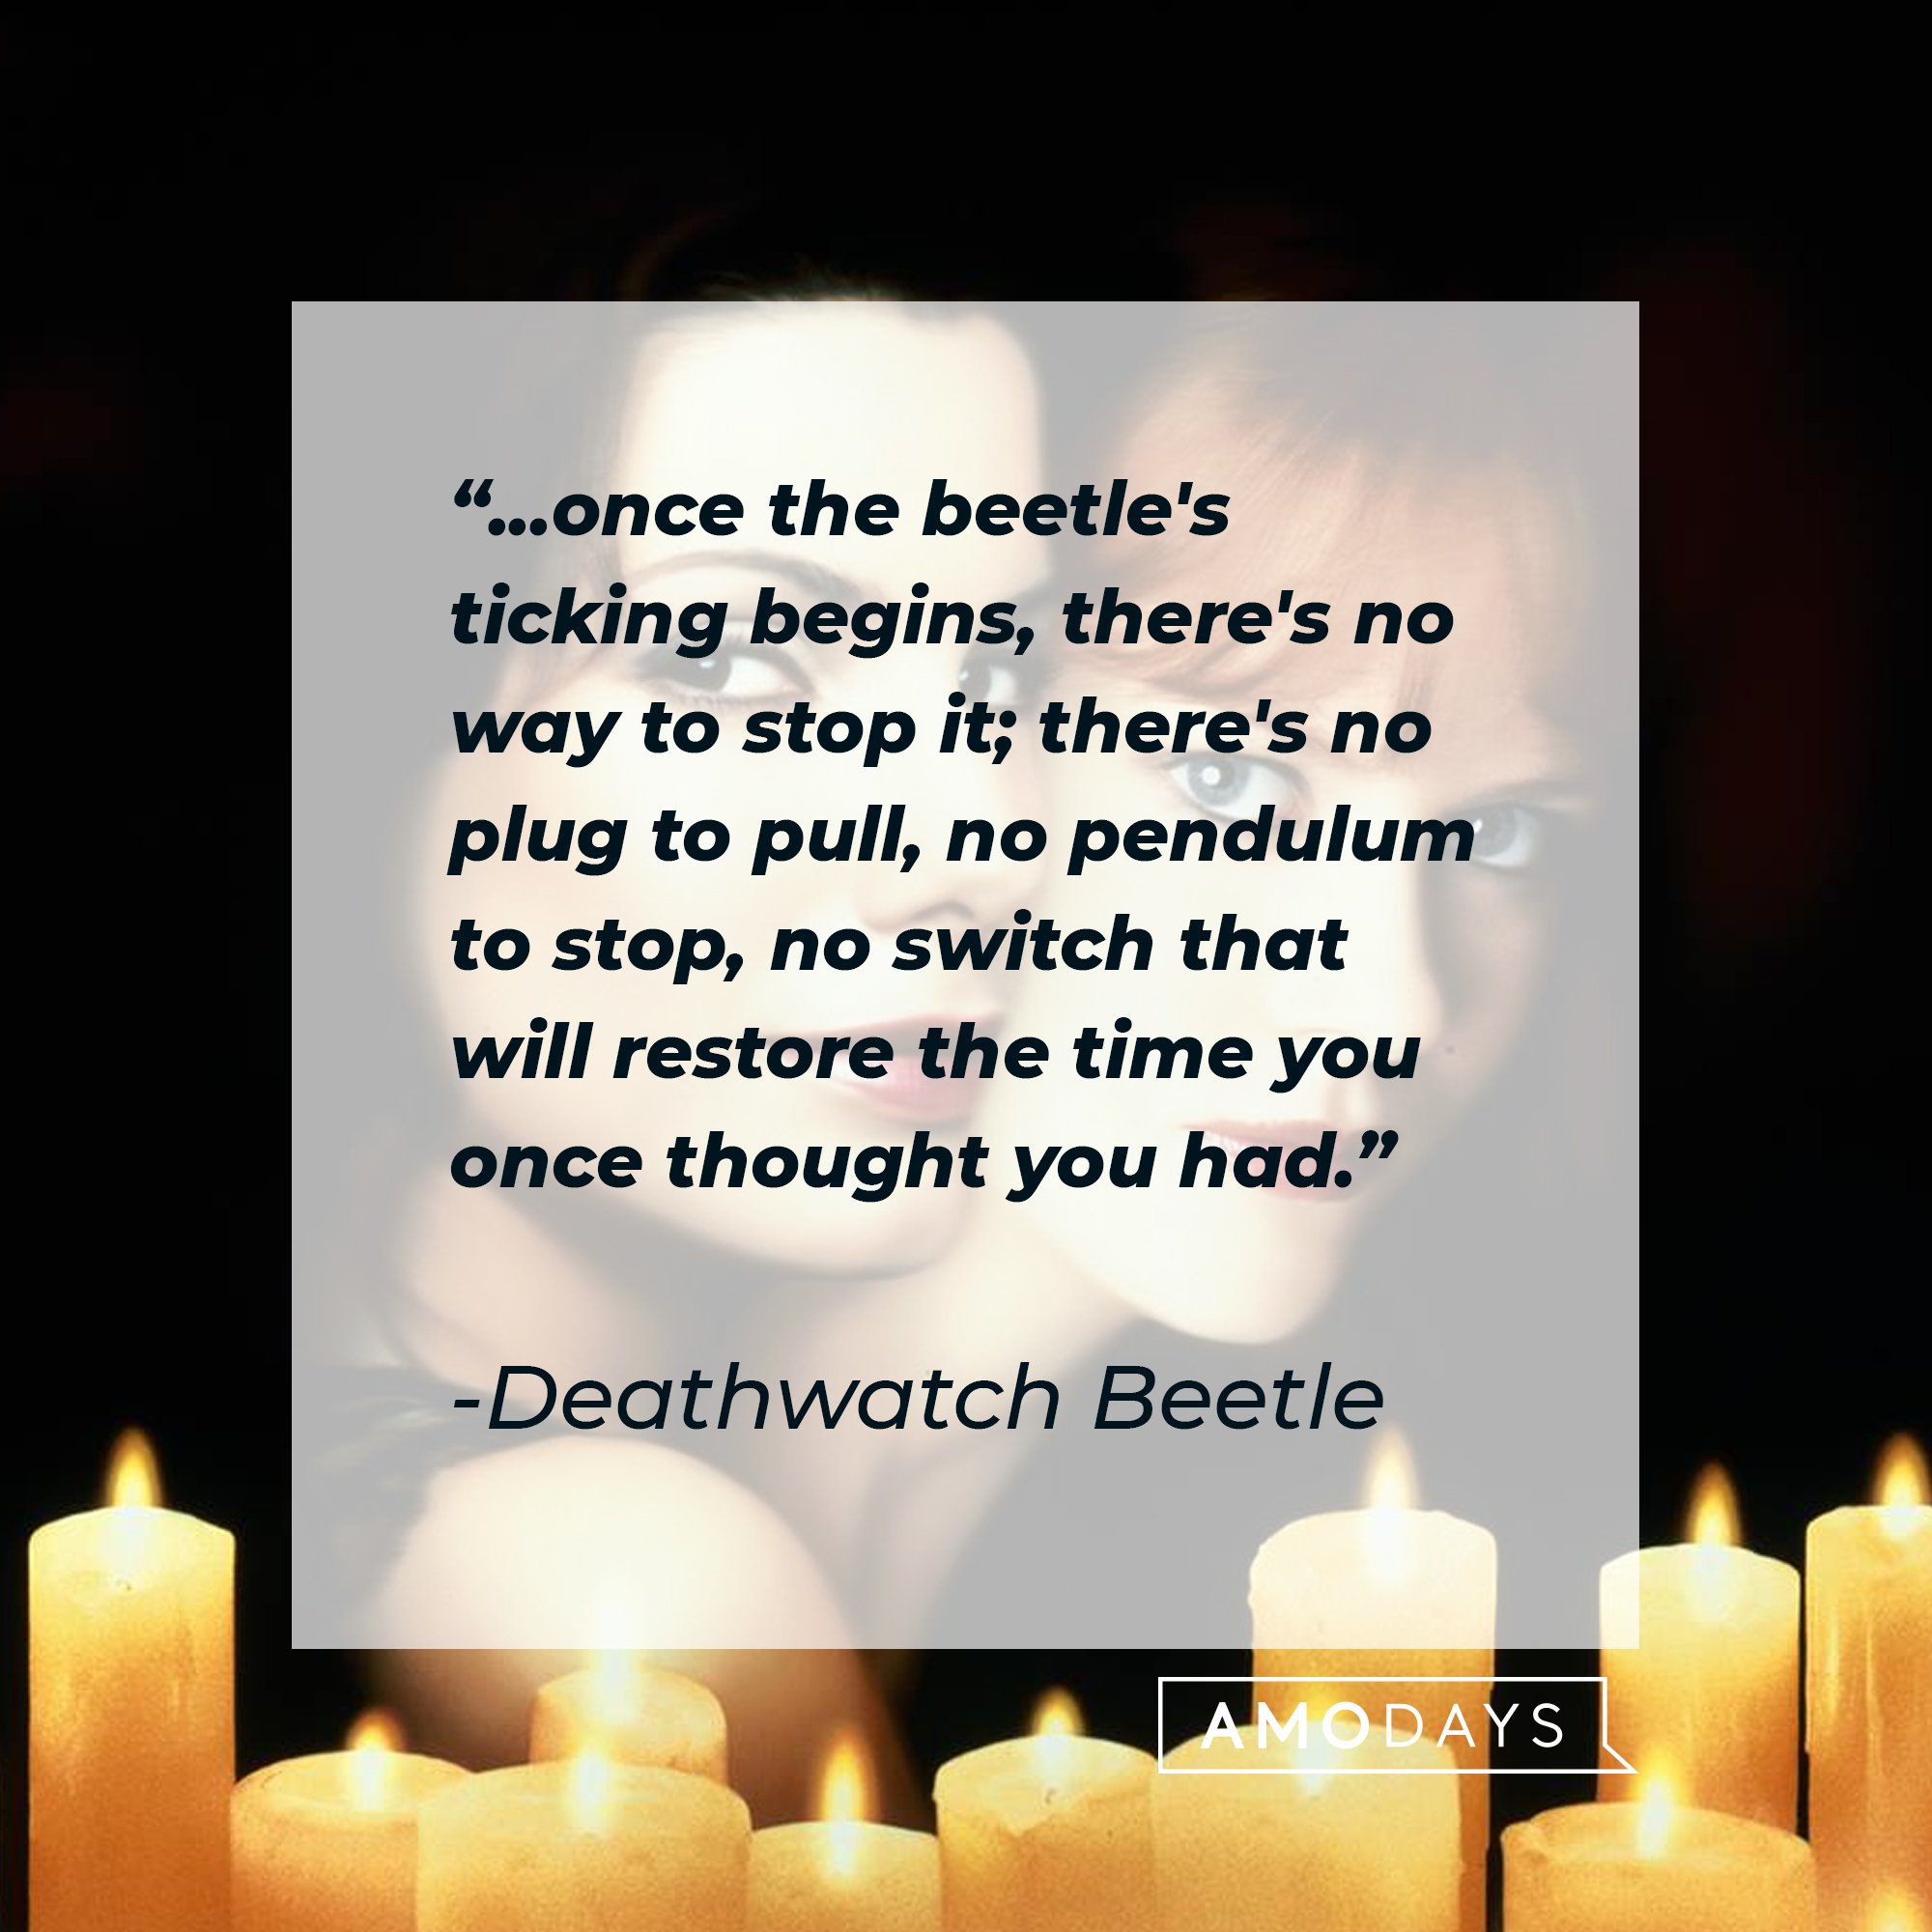  Deathwatch Beetle’s quote: "...once the beetle's ticking begins, there's no way to stop it; there's no plug to pull, no pendulum to stop, no switch that will restore the time you once thought you had." | Image: AmoDays